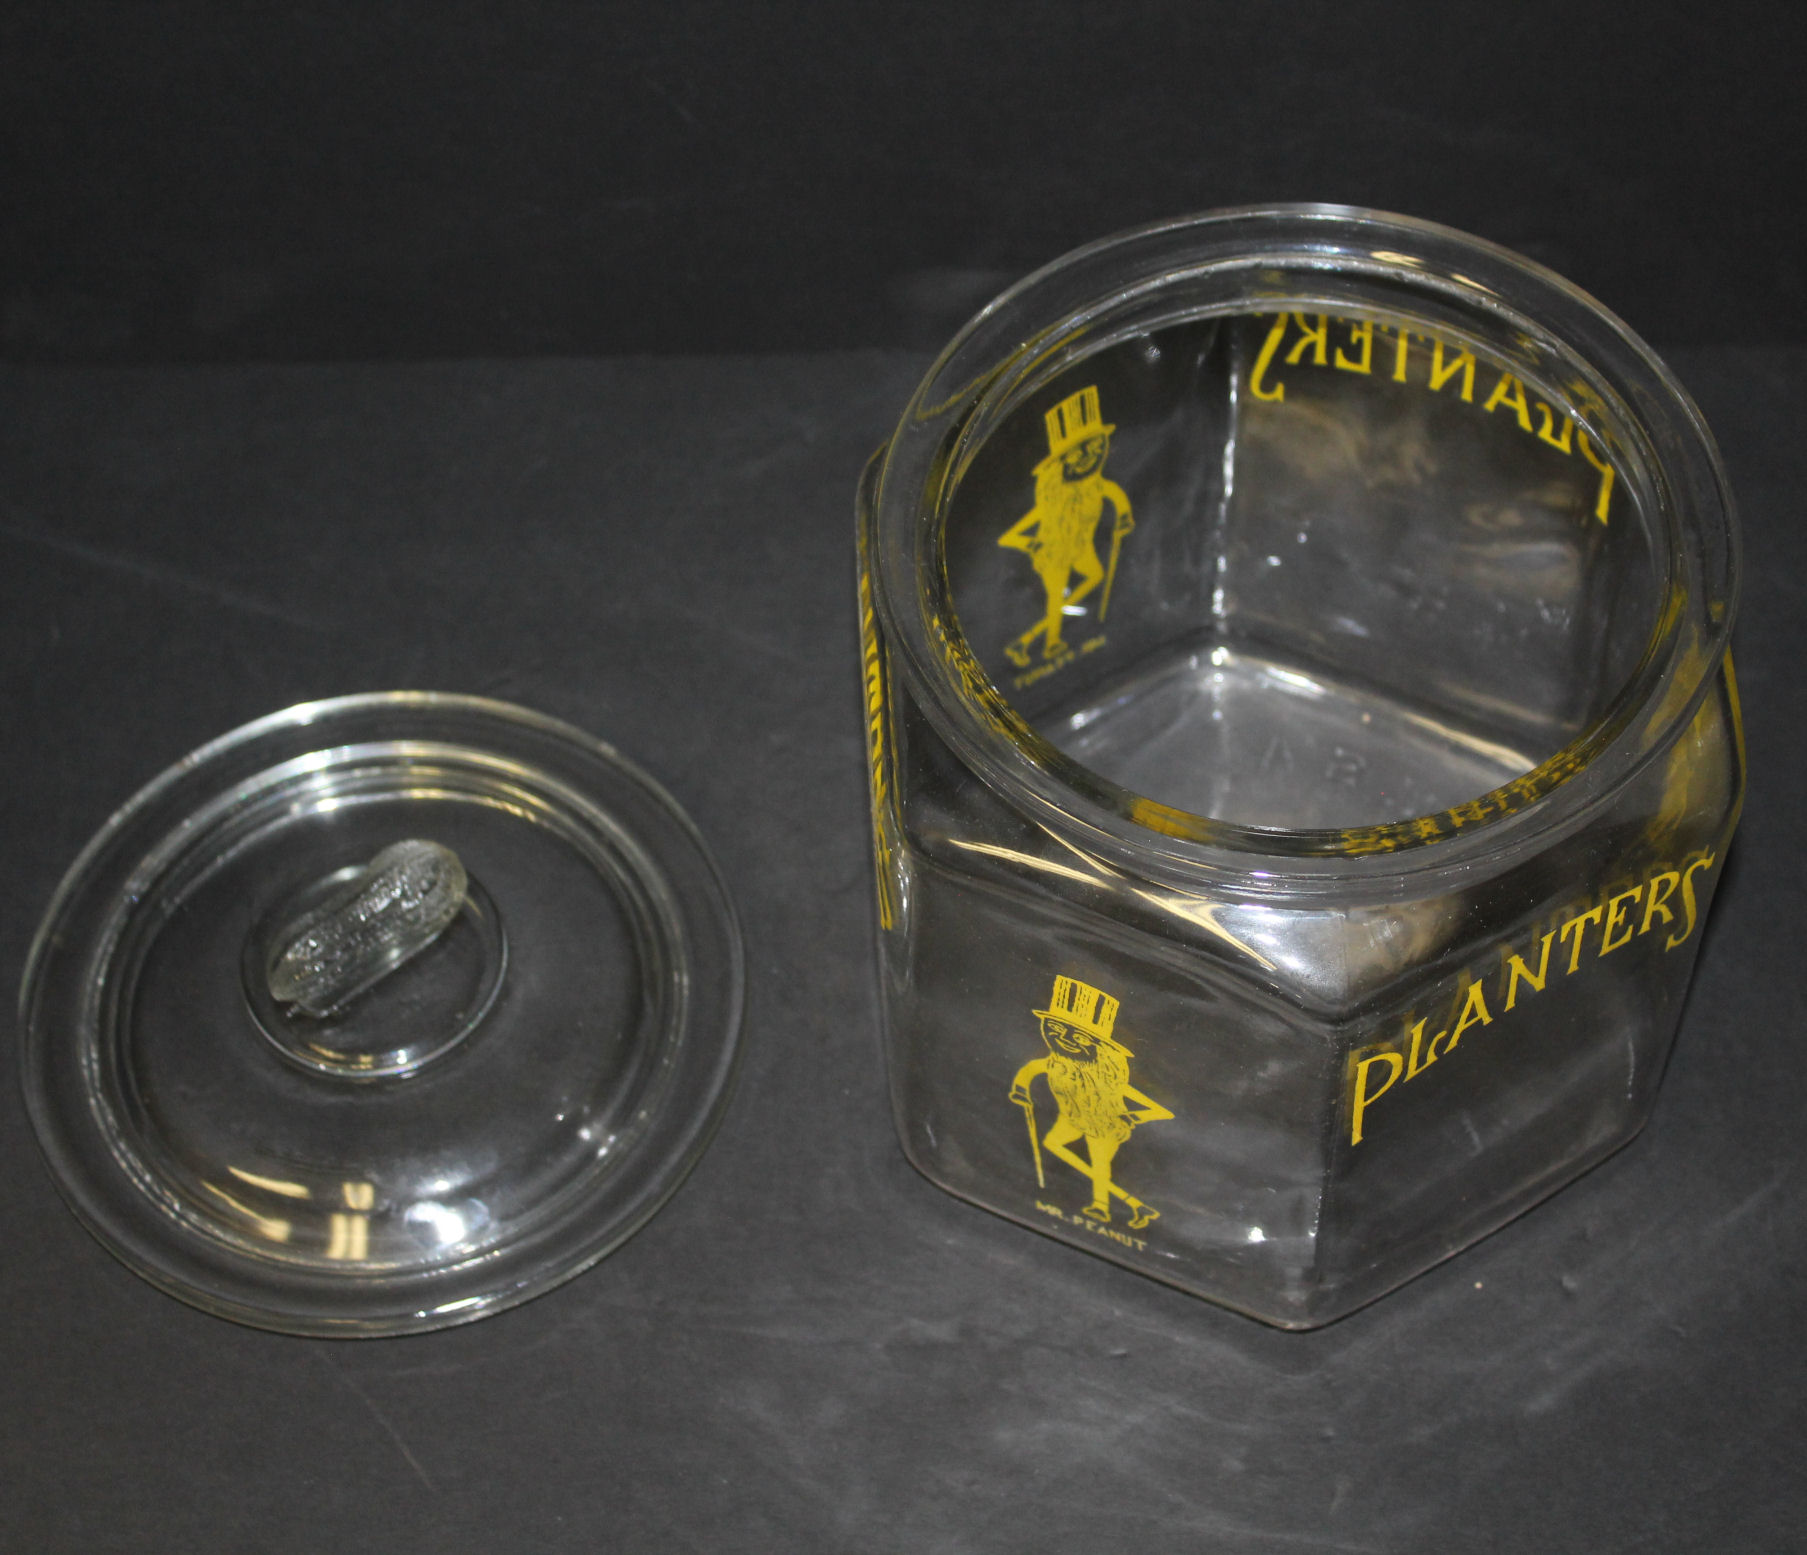 Bargain John's Antiques | Planters Peanuts Advertising Country Store Glass Hexagon ...1807 x 1555